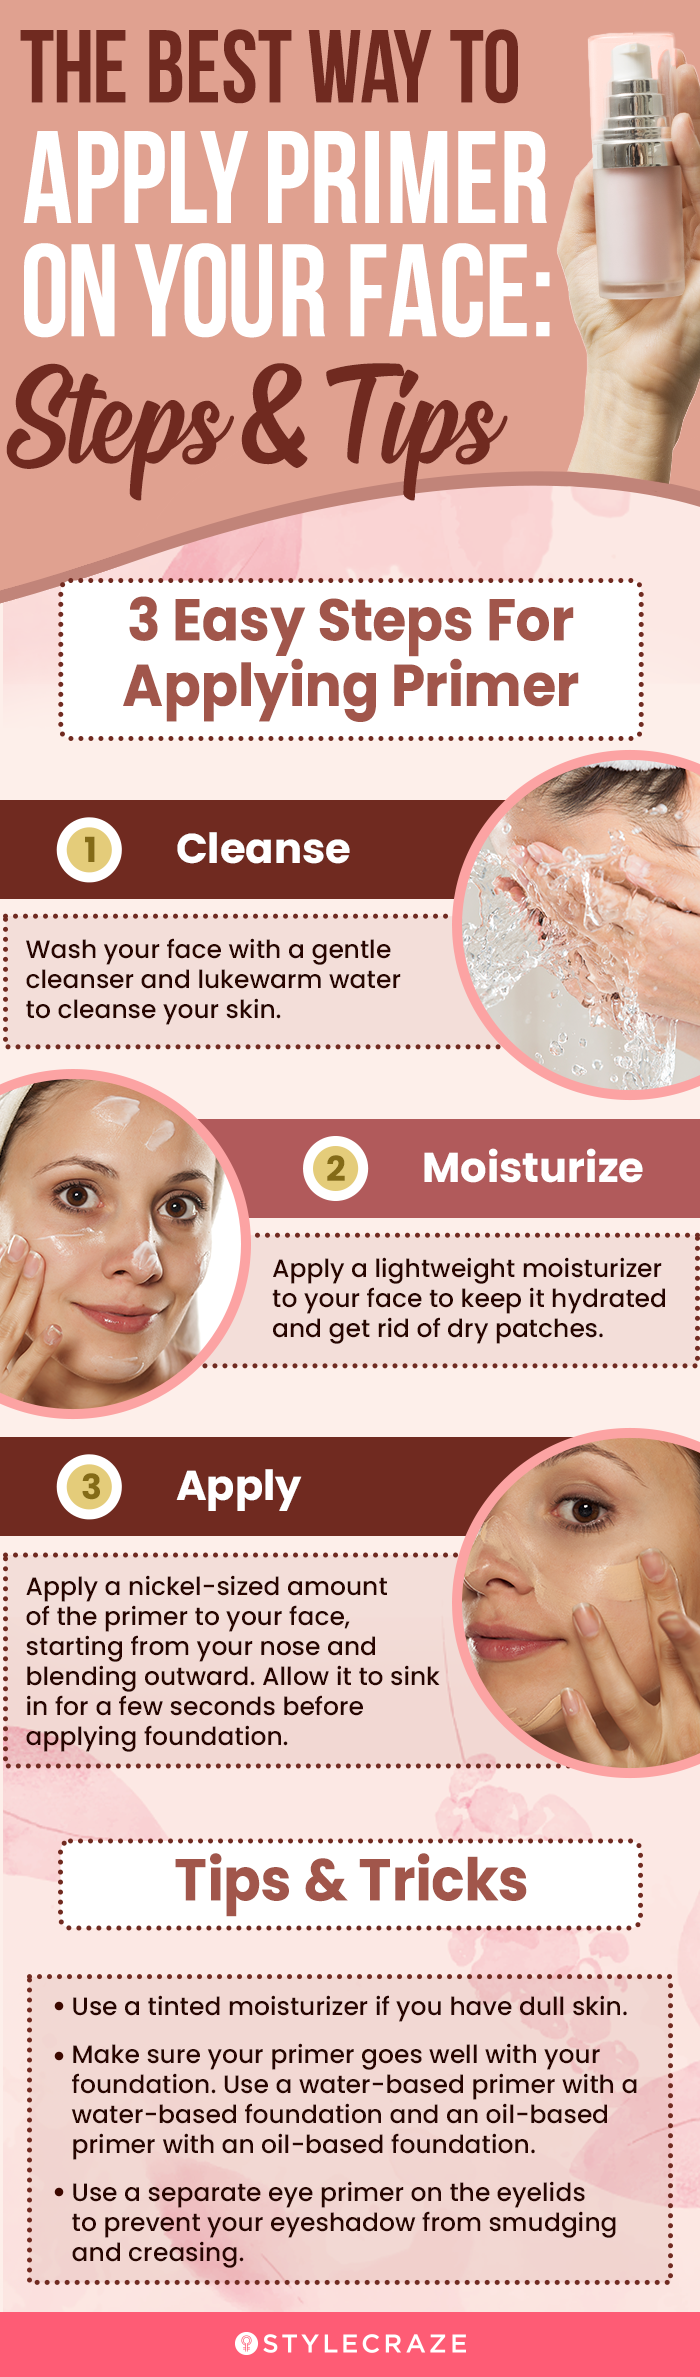 the best way to apply primer on your face steps & tips (infographic)